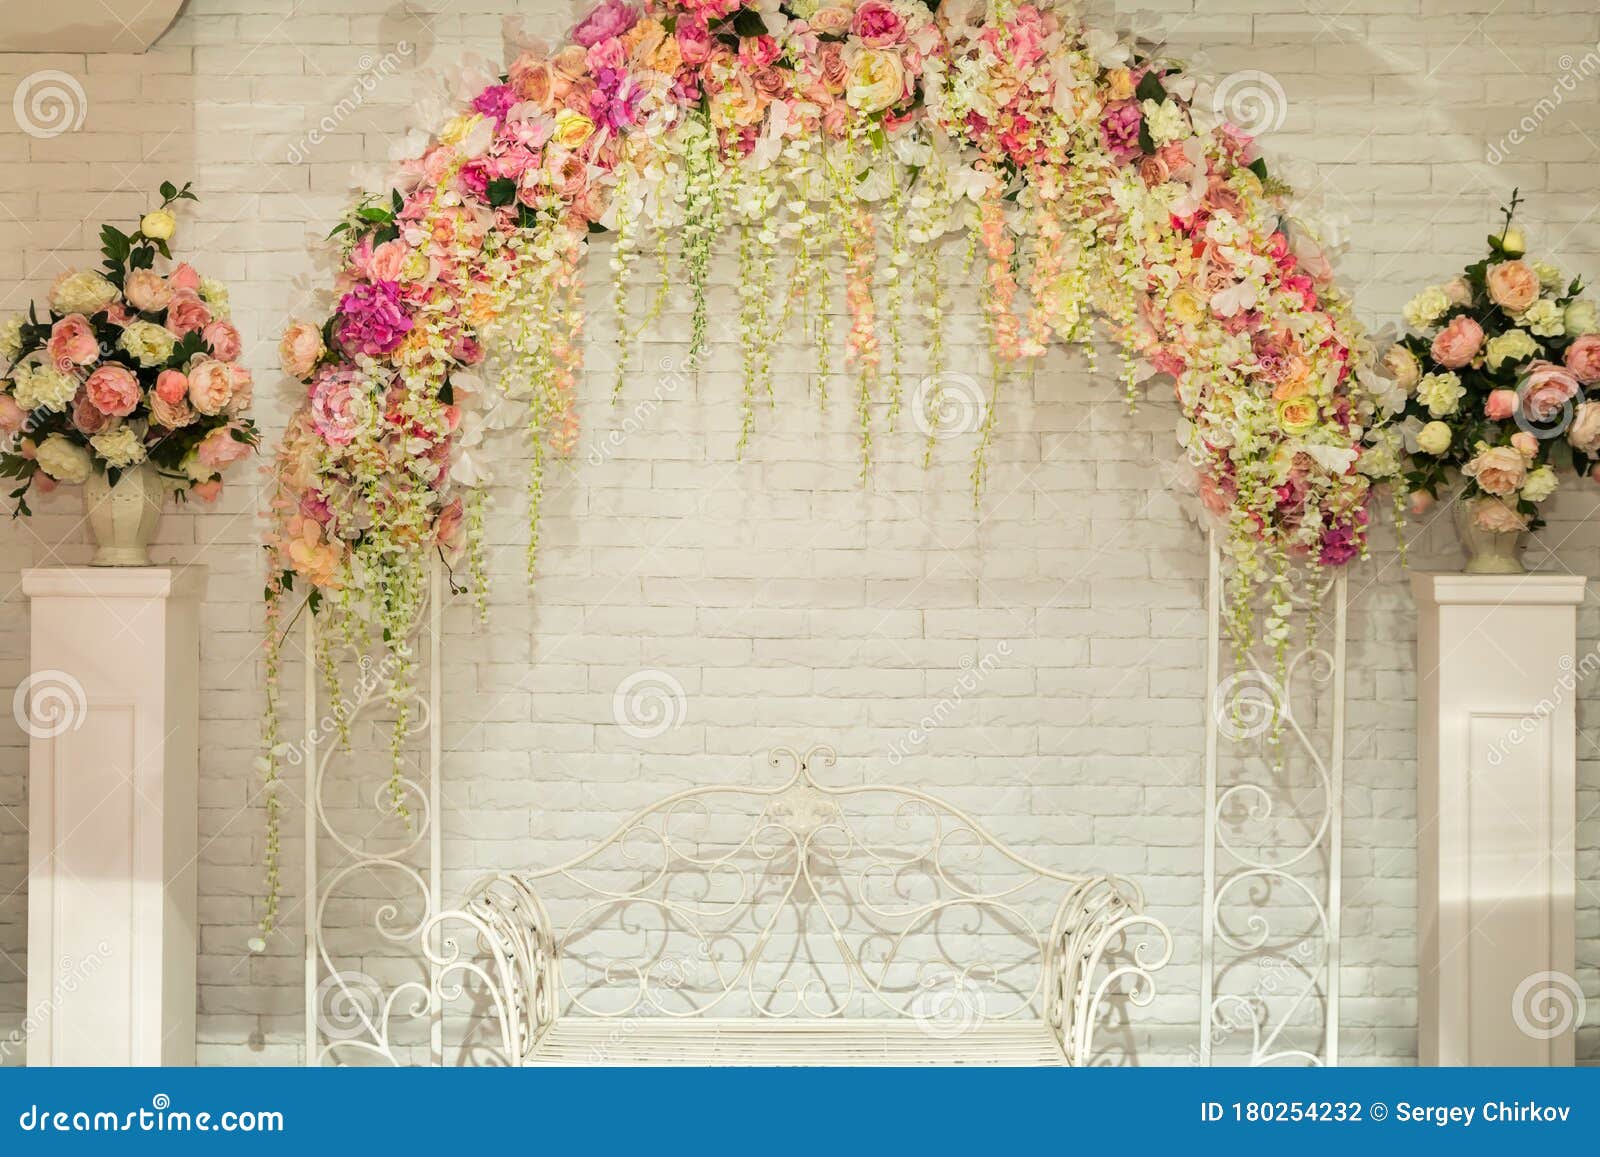 Wedding Arch with Flowers for the Wedding Ceremony Stock Photo - Image of  marriage, events: 180254232